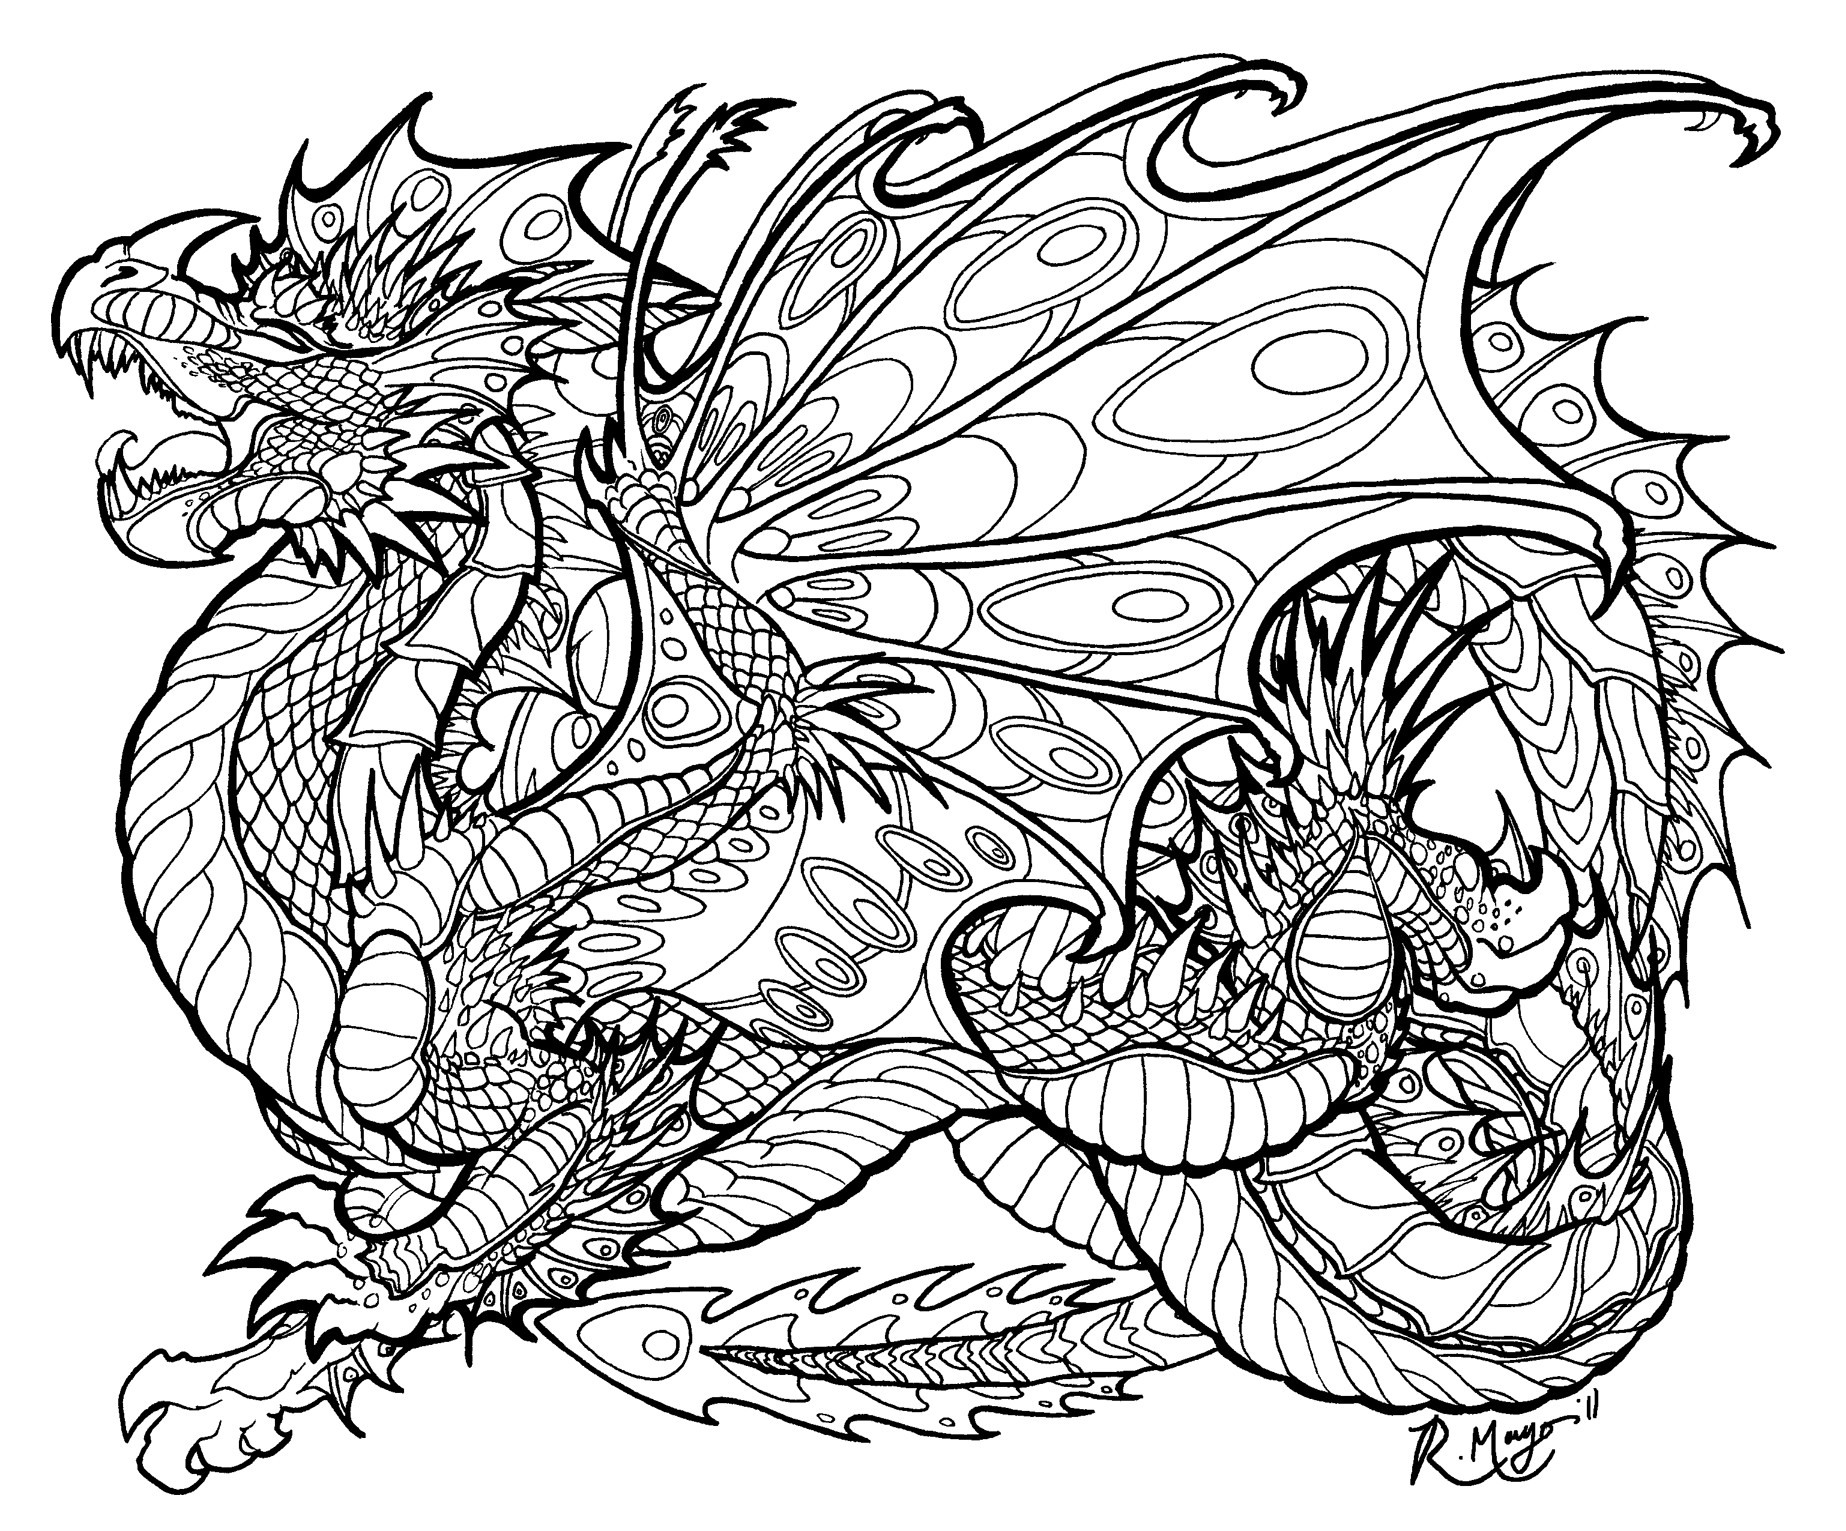 Dragon Coloring Pages For Adults
 Malachite Sentinel lineart by rachaelm5viantart on